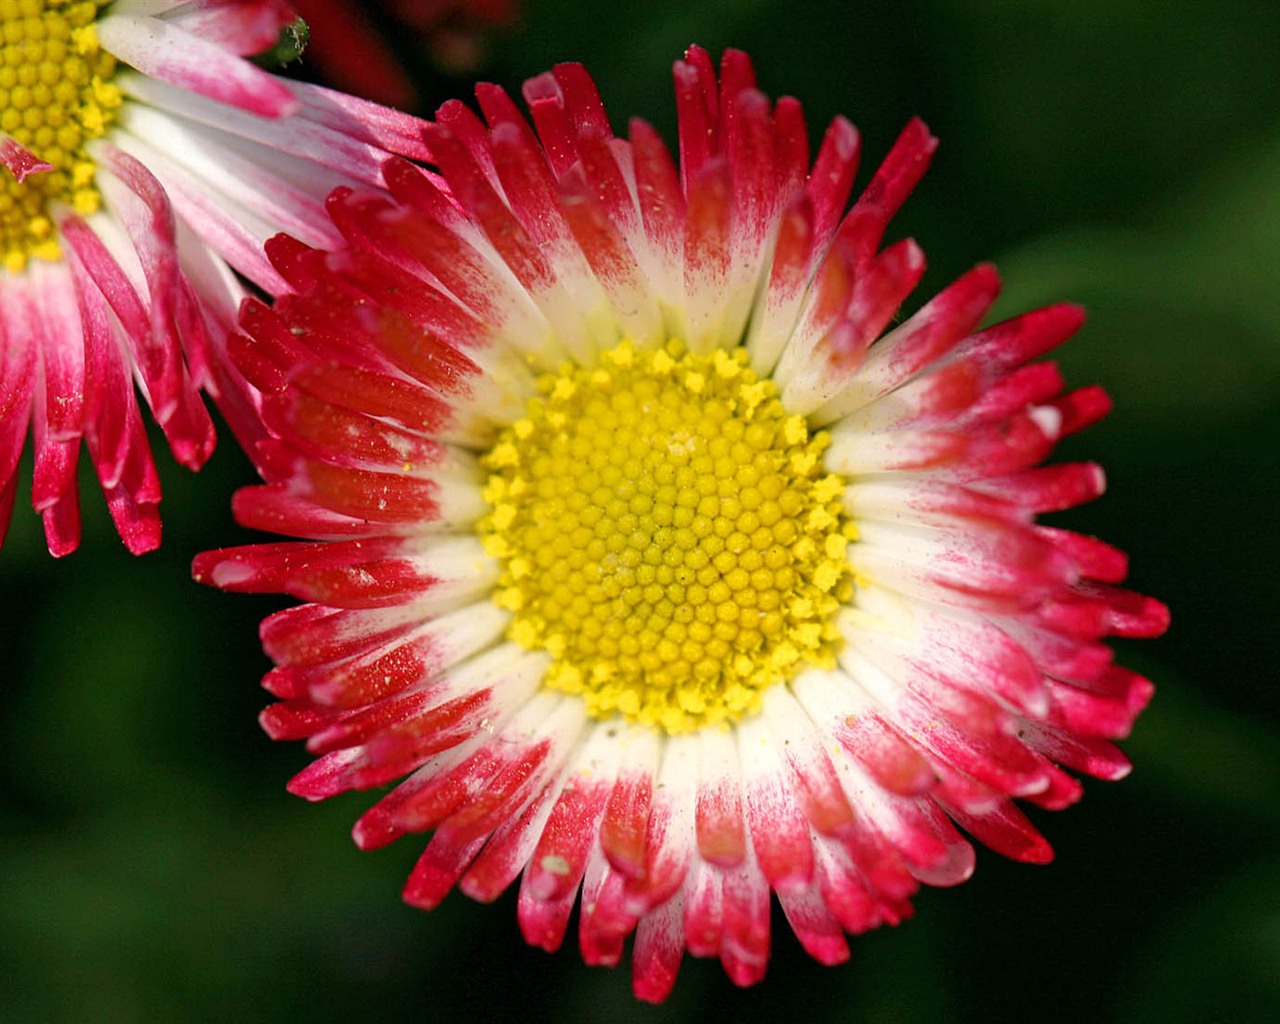 Daisies flowers close-up HD wallpapers #6 - 1280x1024